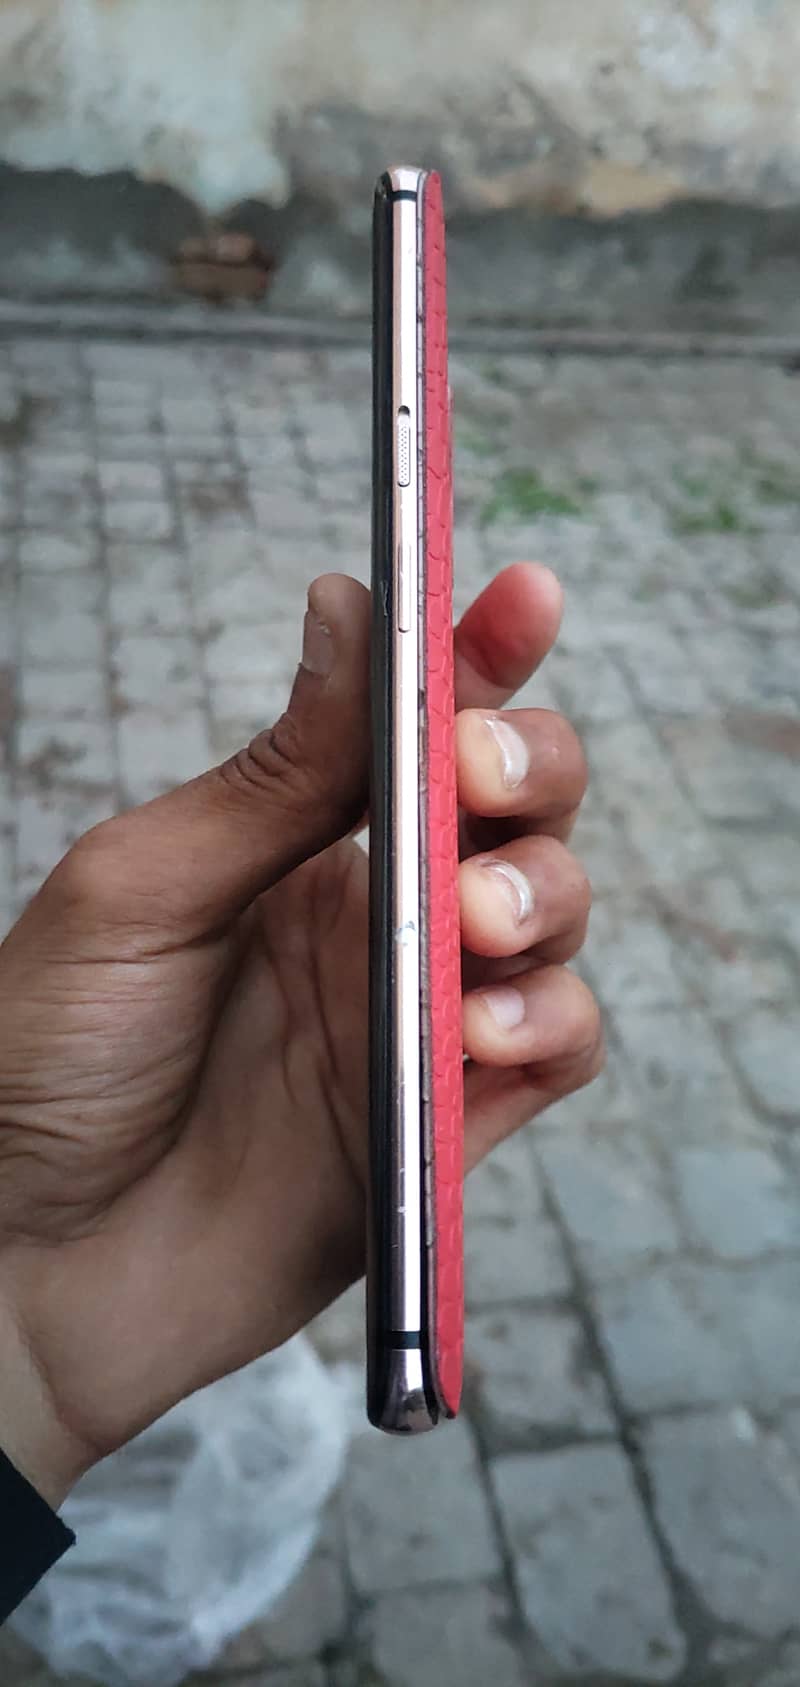 Oneplus 7pro he (baord and battery dad) display and baqi cheze ok he 1